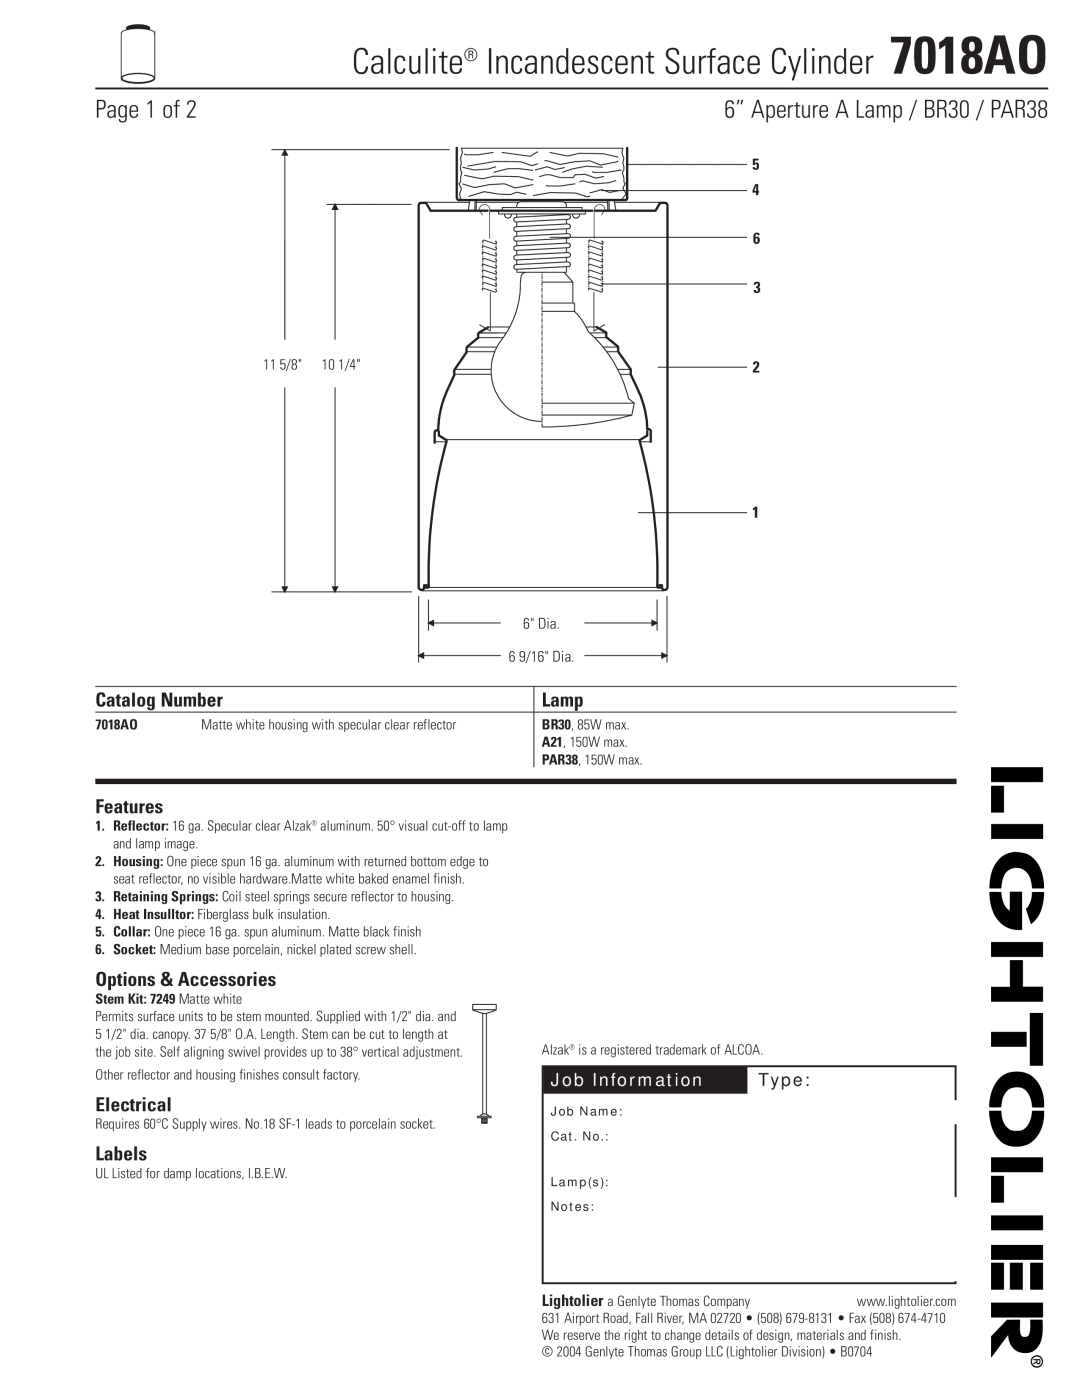 Lightolier manual Job Information, Type, Calculite Incandescent Surface Cylinder 7018AO, Page 1 of, Catalog Number 